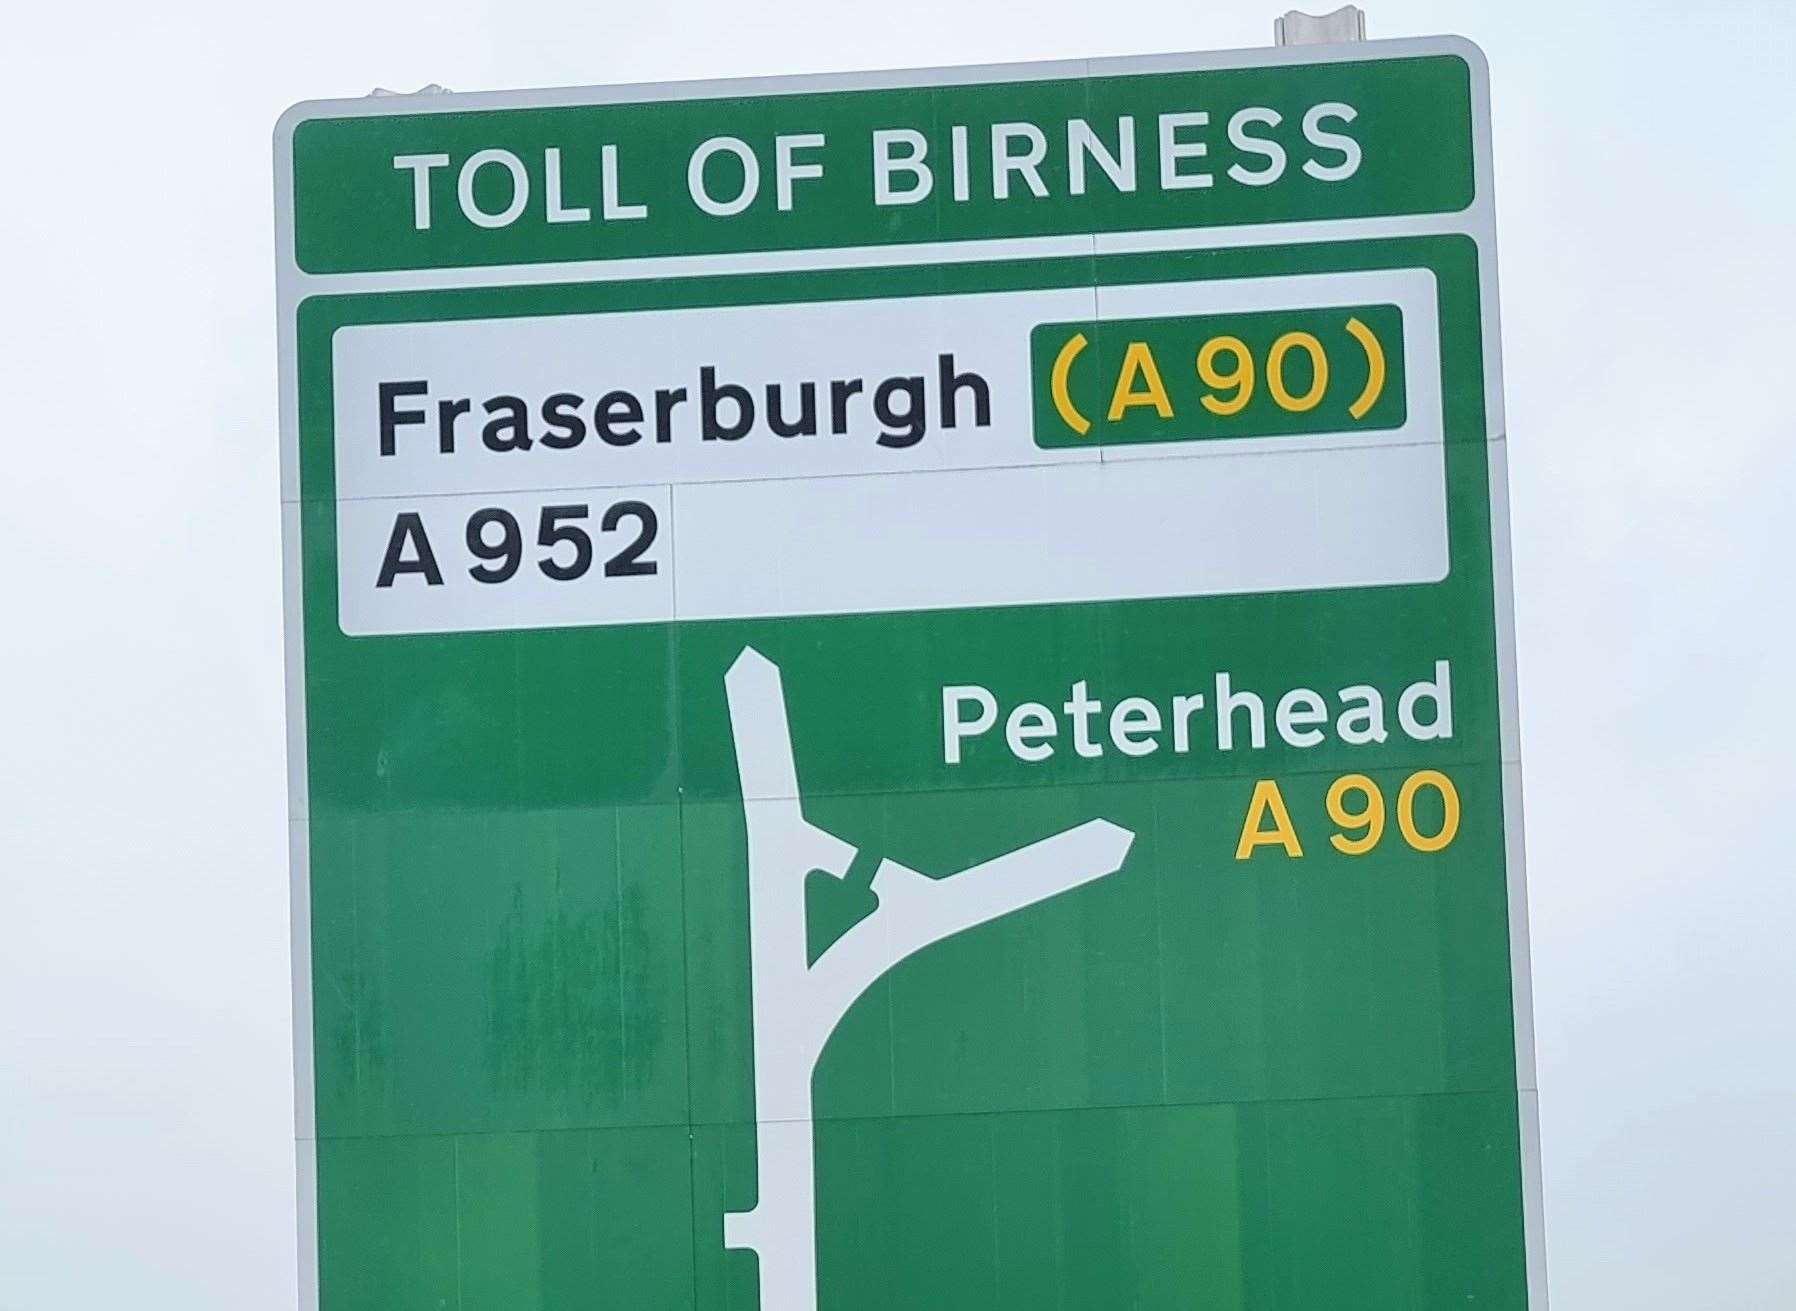 The appraisal will focus on the A90 and A952 roads.